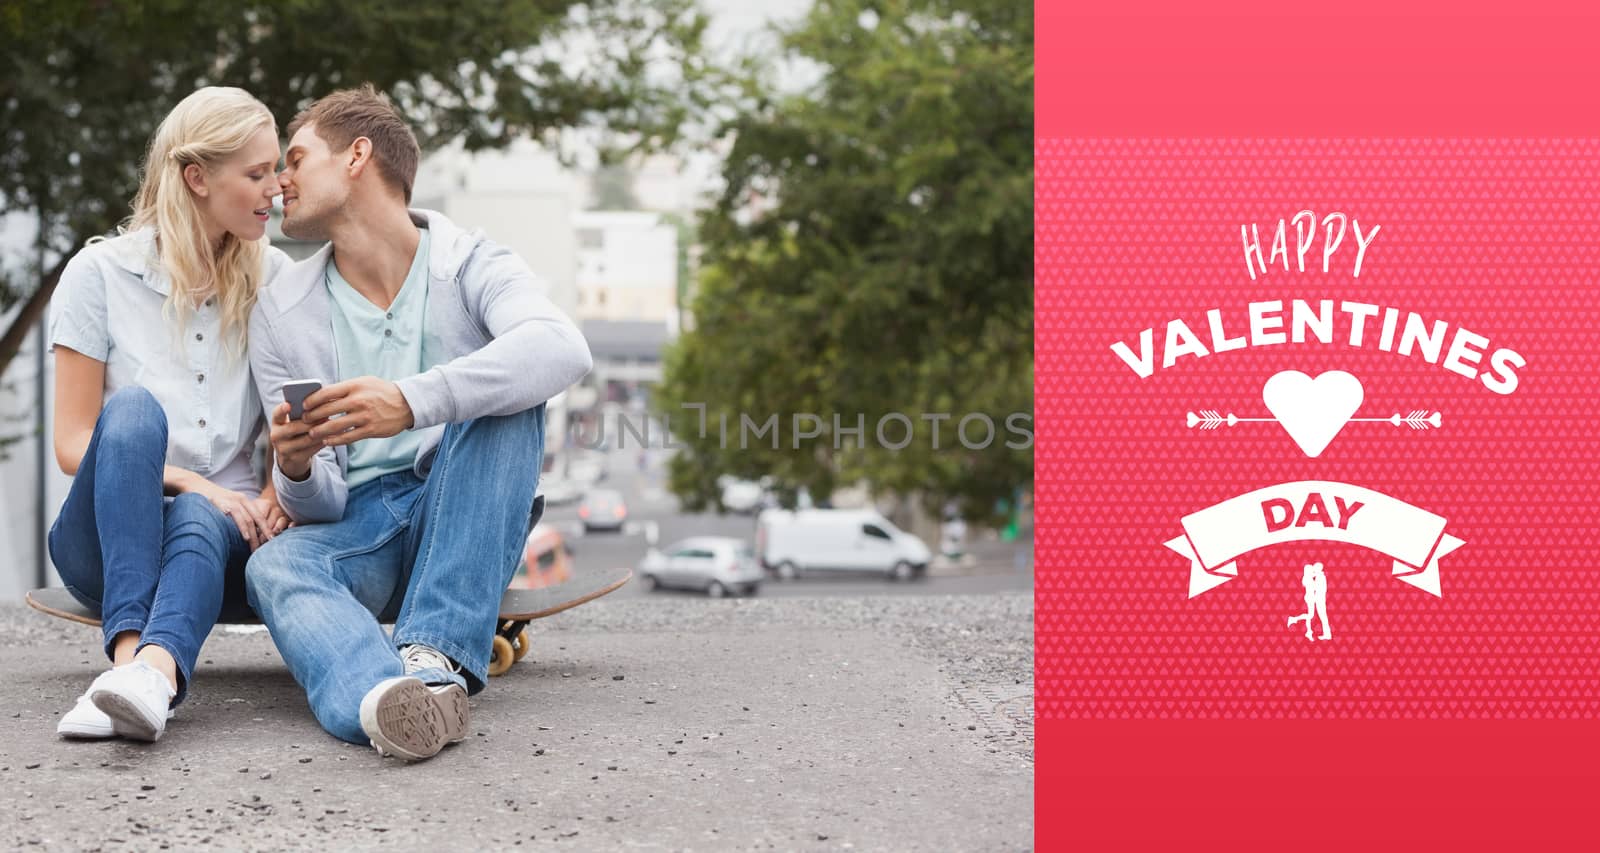 Cute young couple sitting on skateboard kissing against happy valentines day